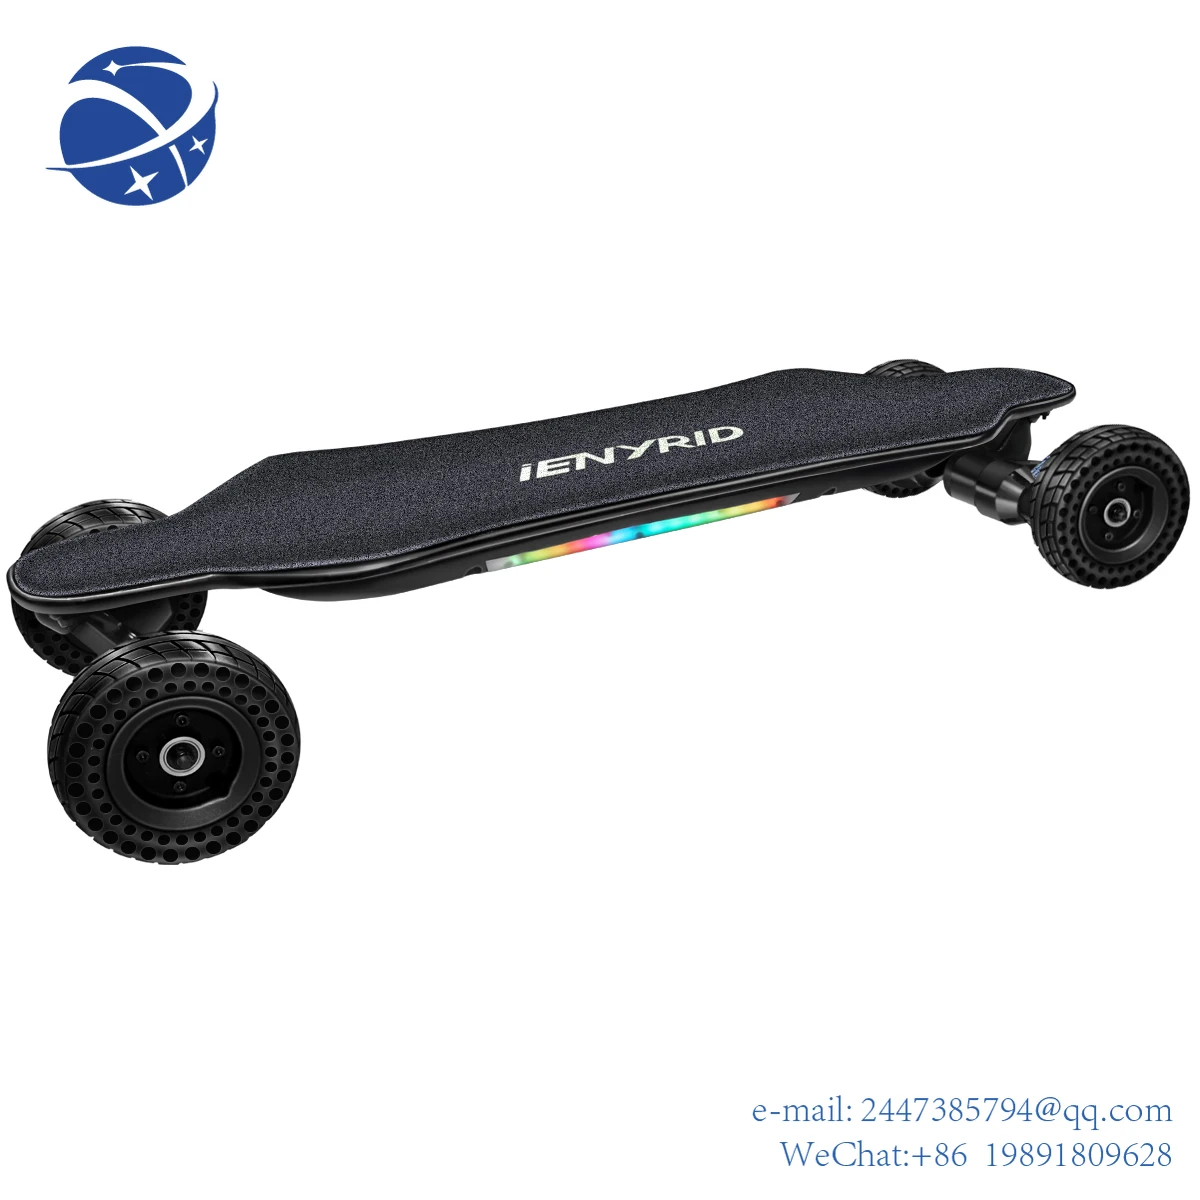 Yun YiUSA warehouse 4 wheel Electric SUV-skateboard Fast delivery time FCC ROHS CE electric skateboard is best electric skateboard saddle for xiaomi m365 scooter